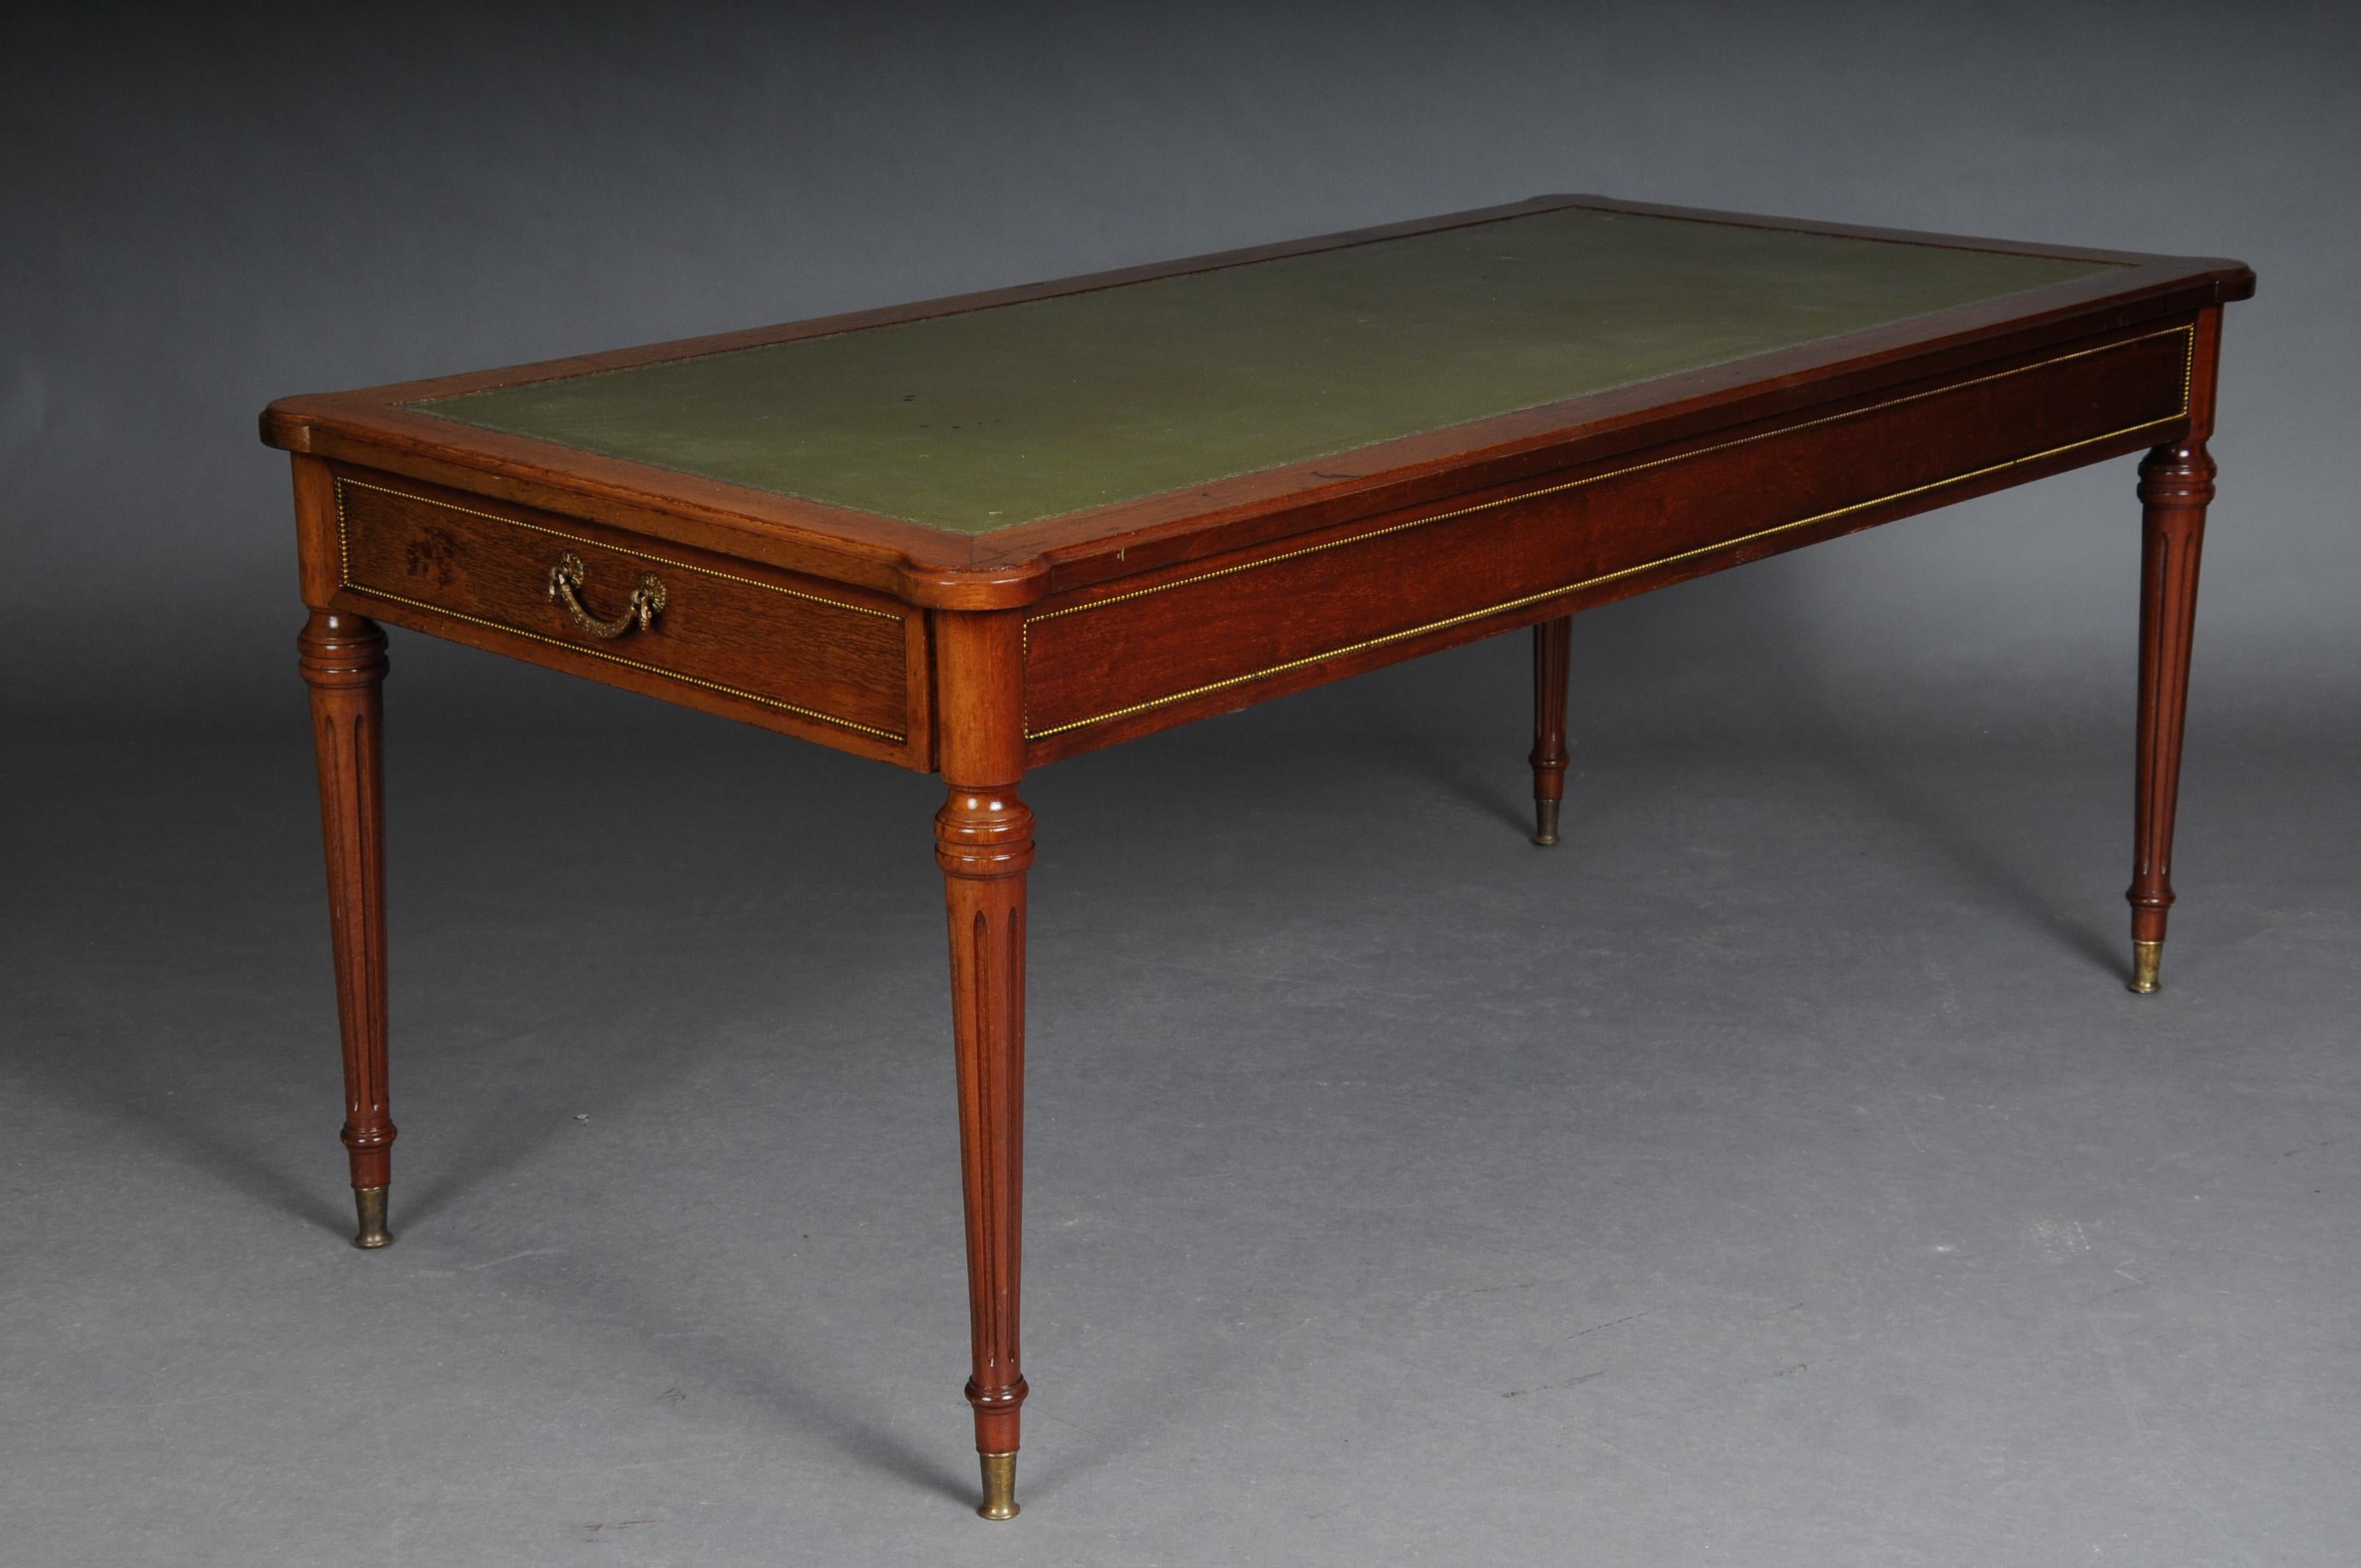 20th century Classicist English coffee table leather top

Body made of moving wood. Partially furnished in mahogany. On tapered and fluted areas.
Covered with green leather. Bronze fittings. One drawer on the front.

(A-162).